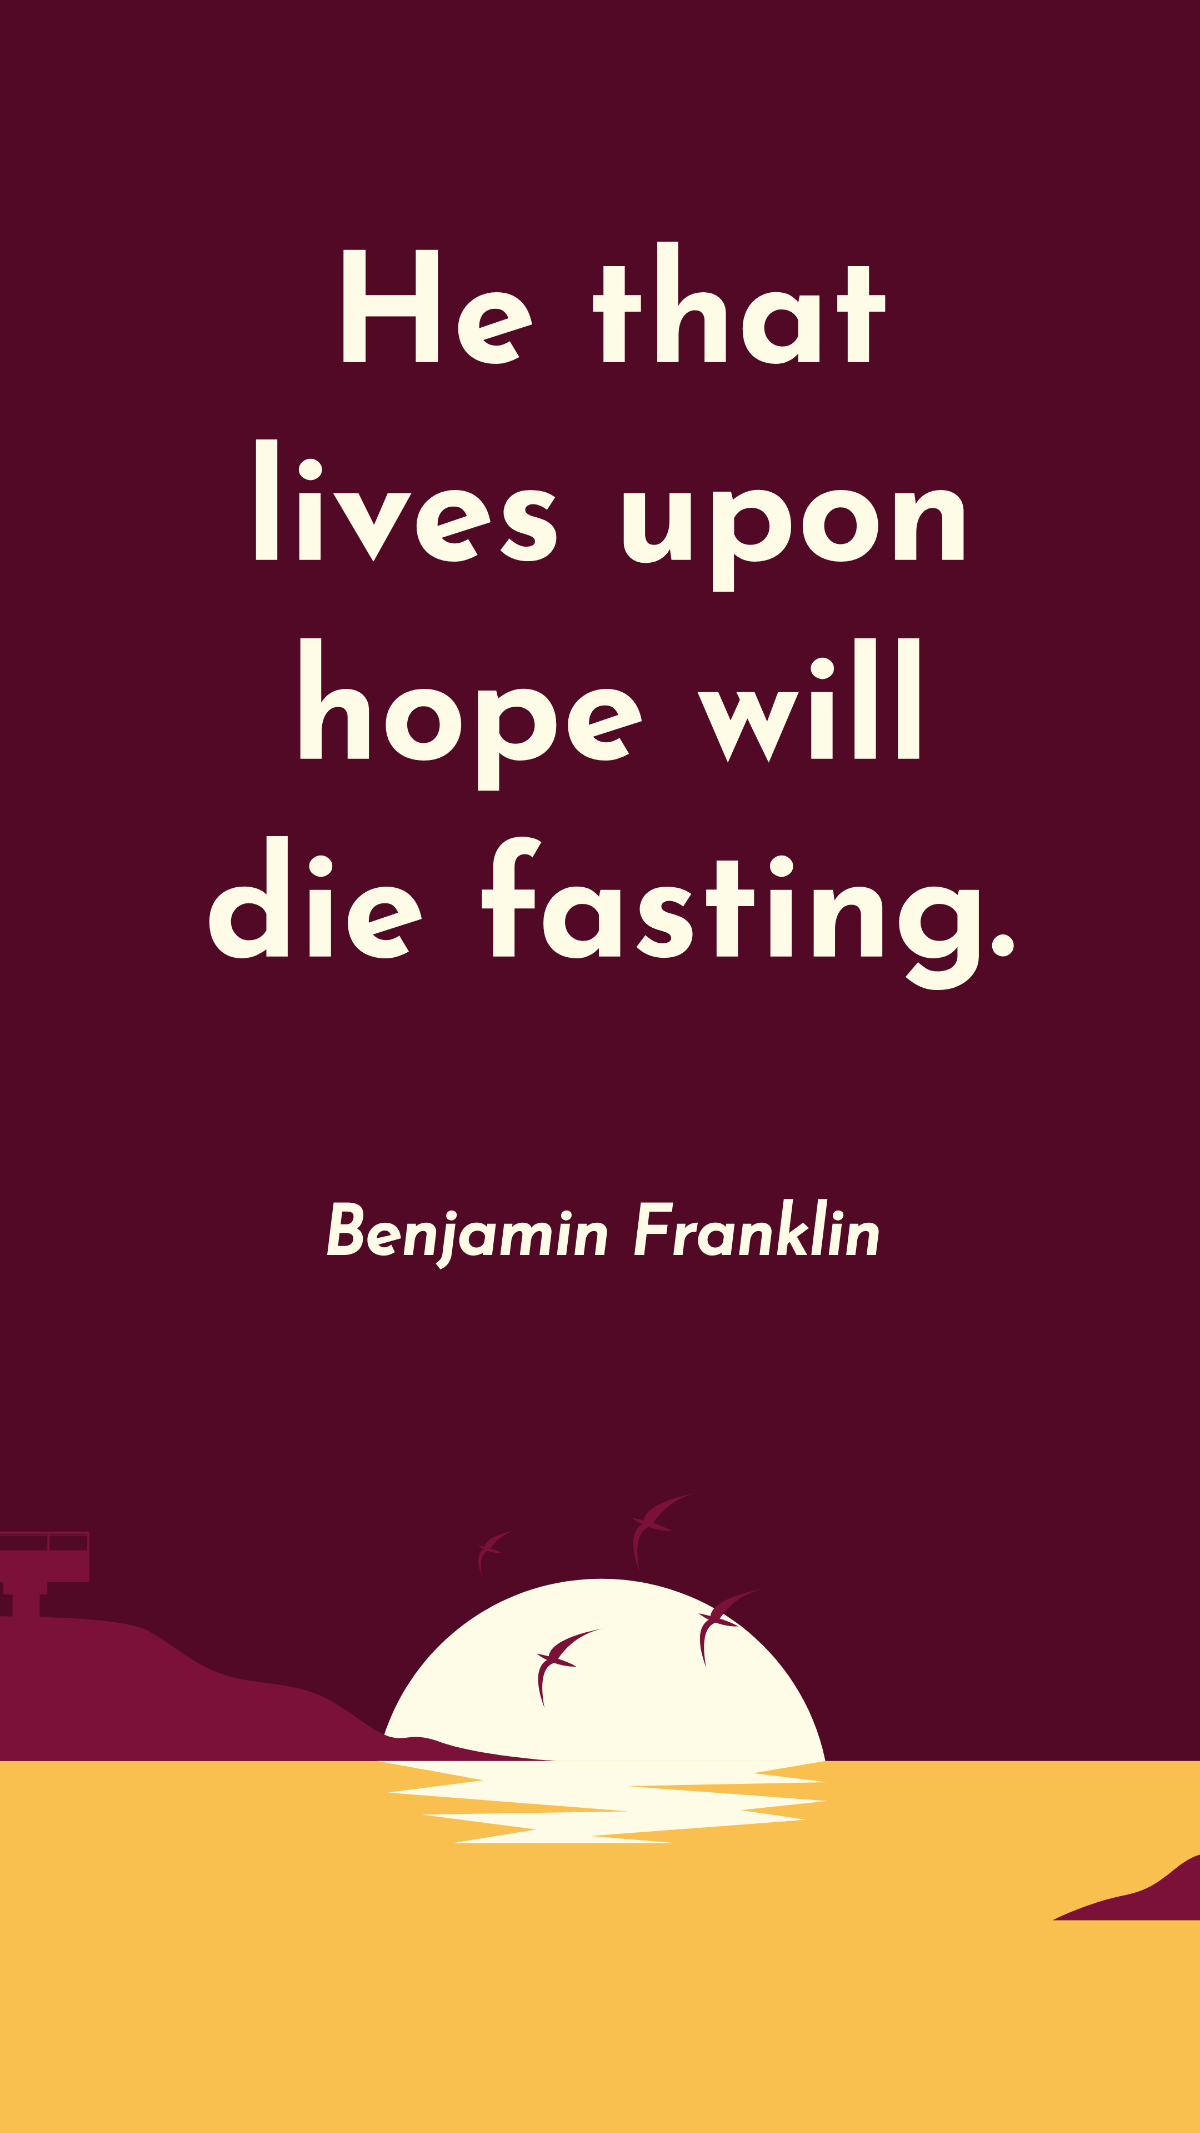 Free Benjamin Franklin - He that lives upon hope will die fasting. Template